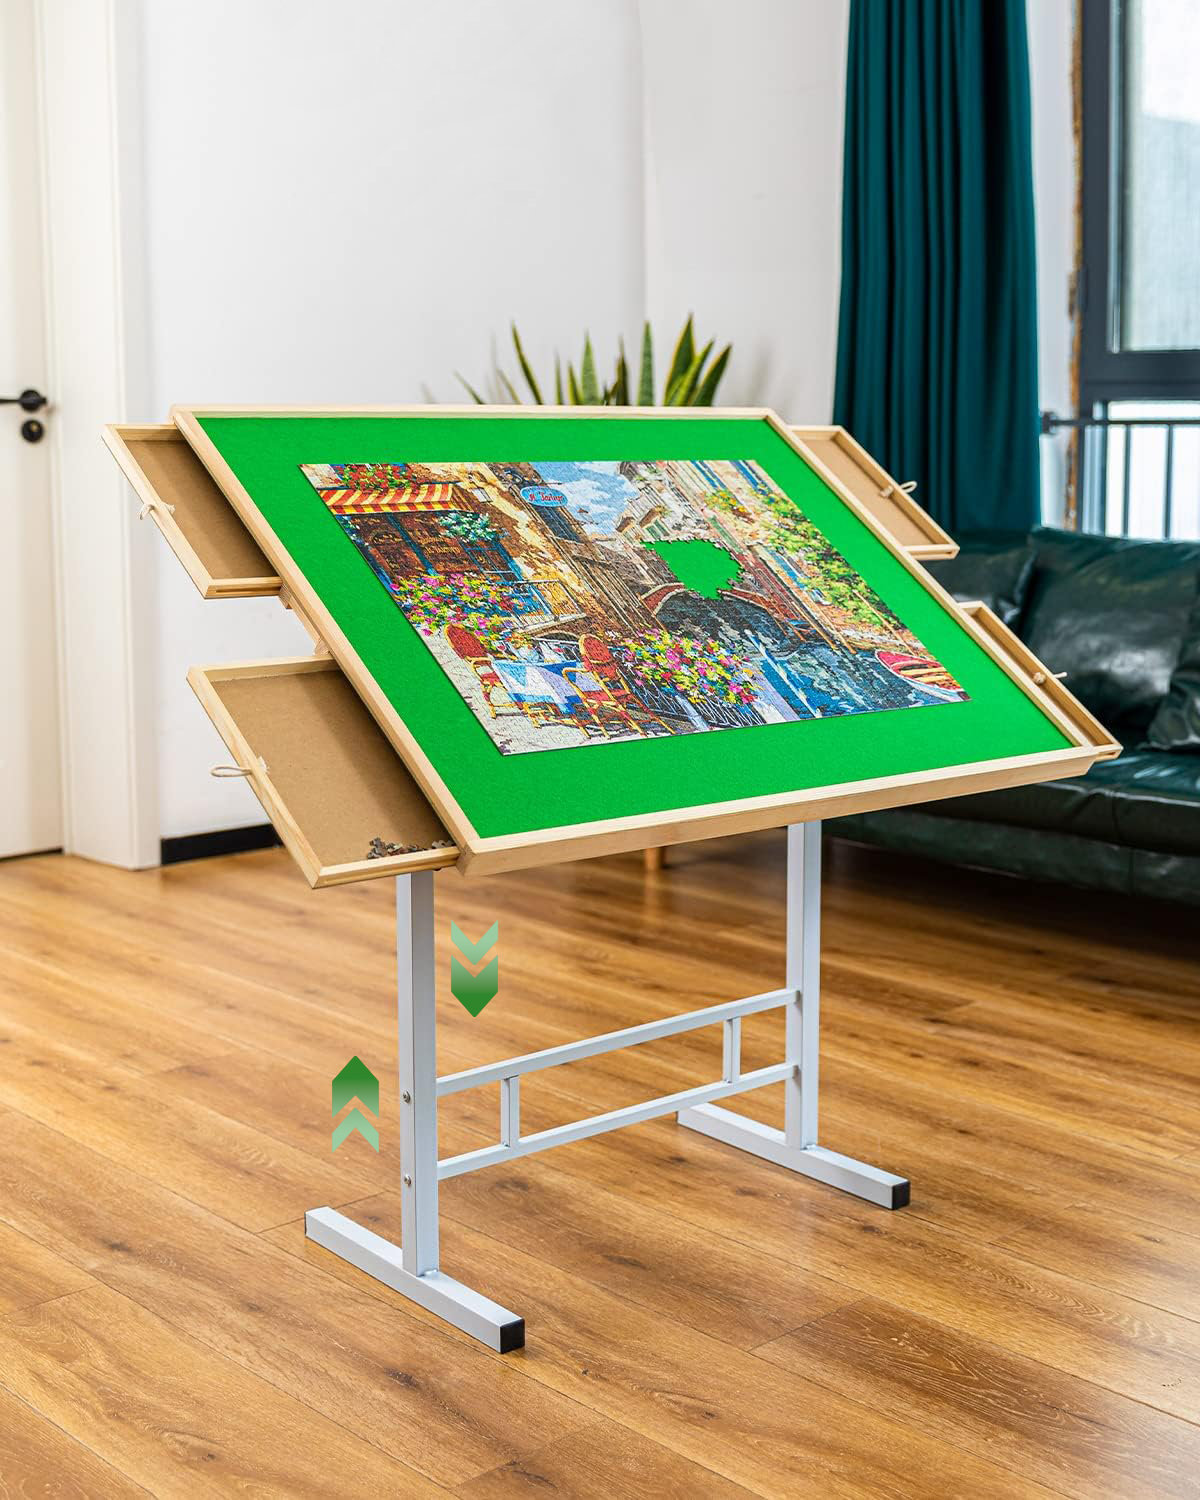 Puzzle Table with Legs Angle & Height Adjustable, Tilting Table with 4  Wheels for 1500 Piece